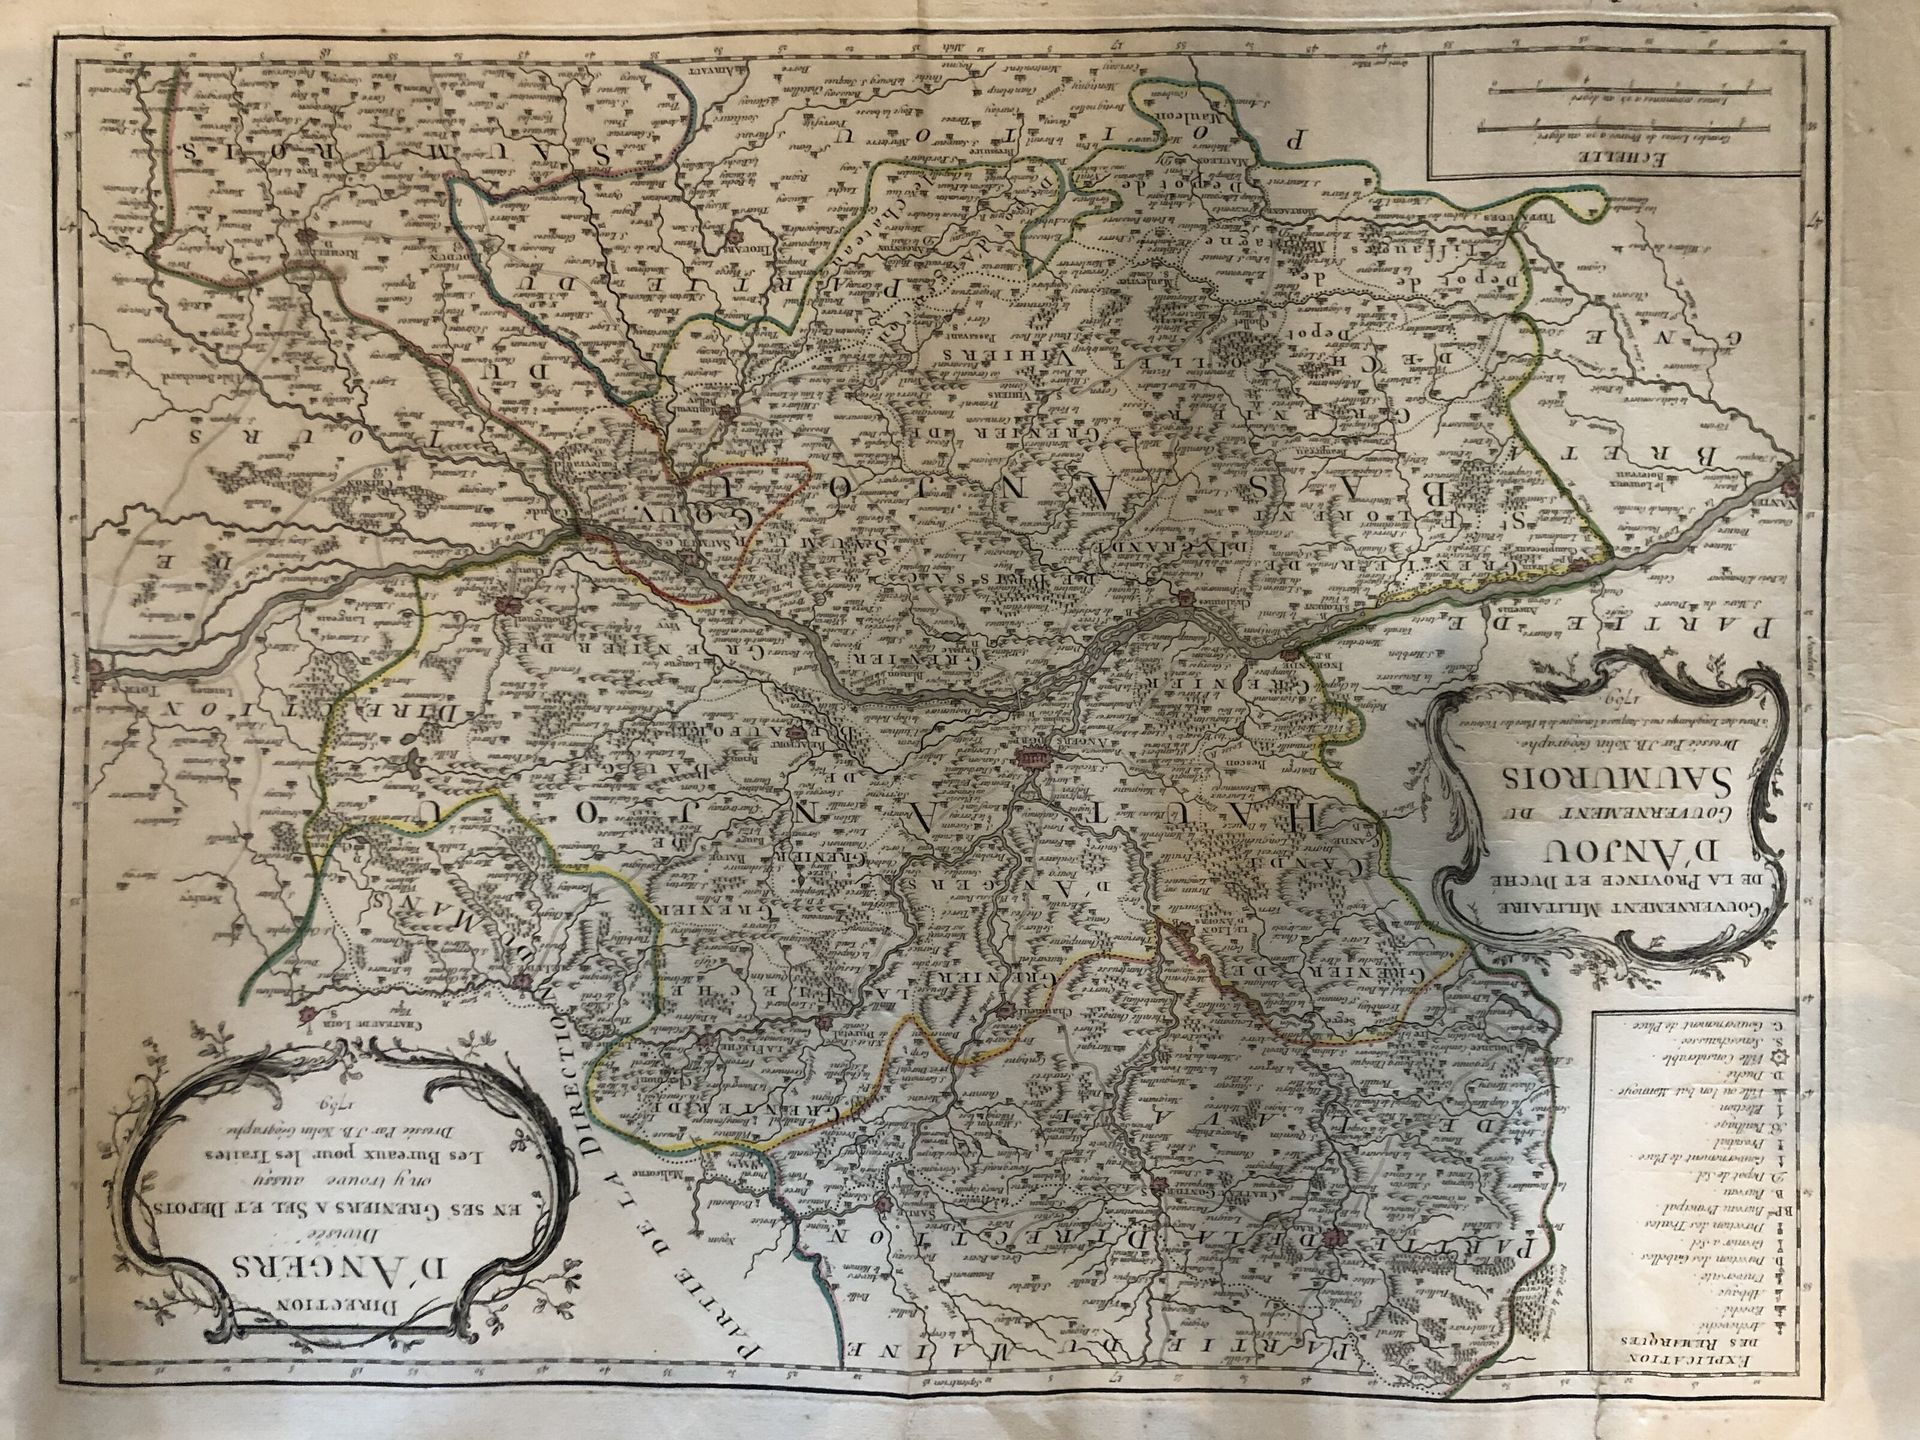 NOLIN, J.-B. ; BUACHE ; CHANLAIRE. Set of 4 maps of French regions. 18th century&hellip;